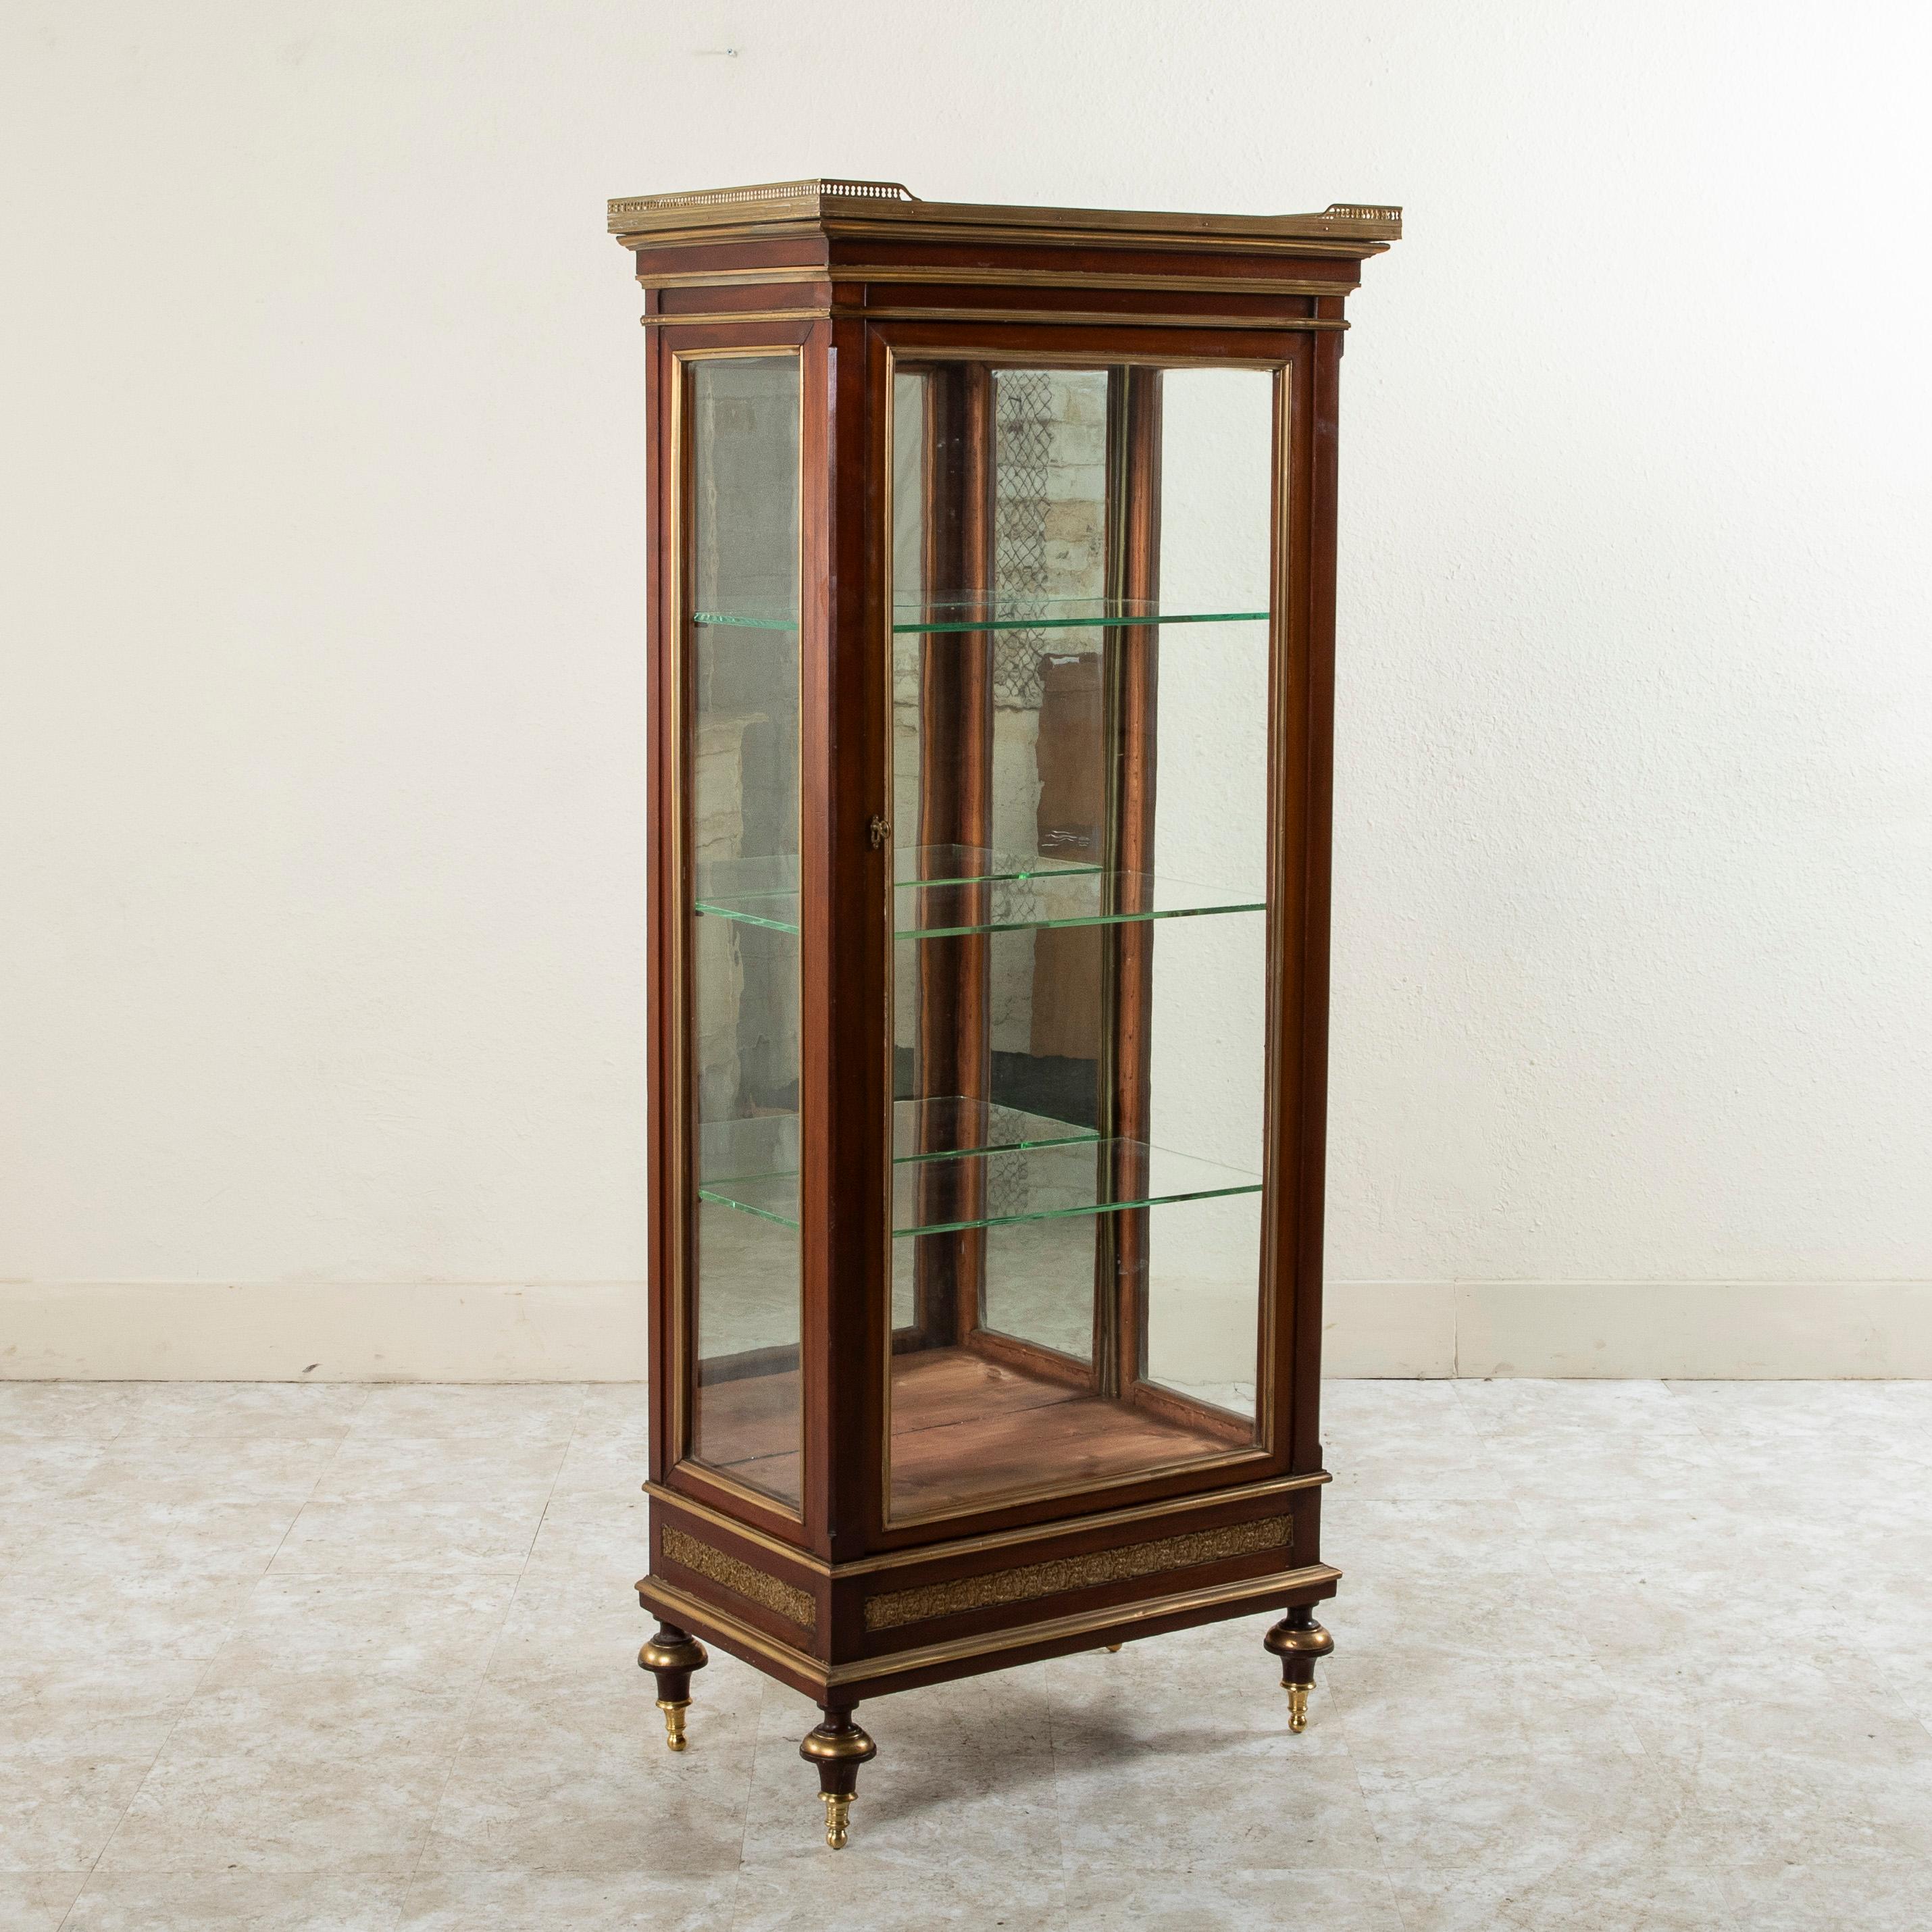 With glass on three sides, this French Louis XVI style mahogany vitrine from the mid nineteenth century is ideal for displaying any fine collection. Resting on turned finial feet detailed in bronze, this piece also features bronze detailing around